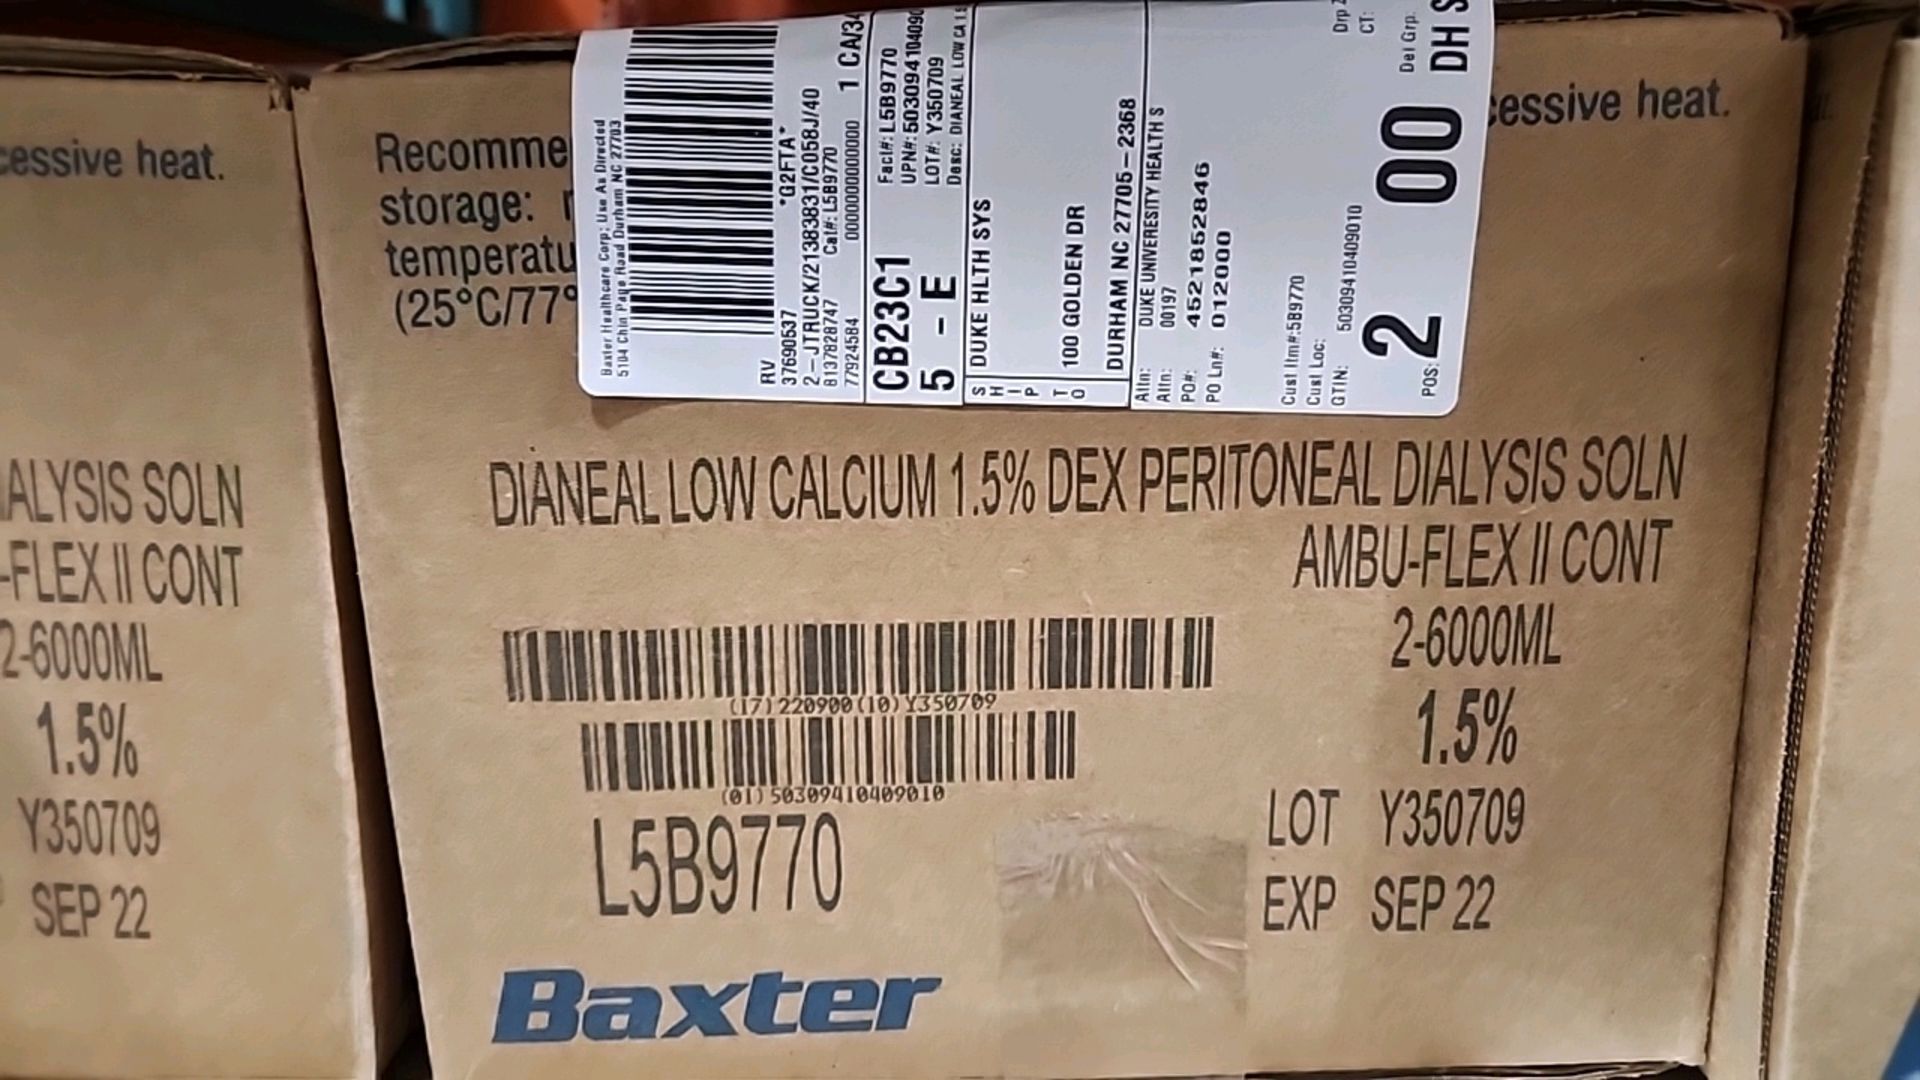 BAXTER REF L5B9770 DIANEAL LOW CALCIUM 1.5% DEX PERITONEAL DIALYSIS SOLUTION (NOT IN DATE) LOCATION: - Image 3 of 3